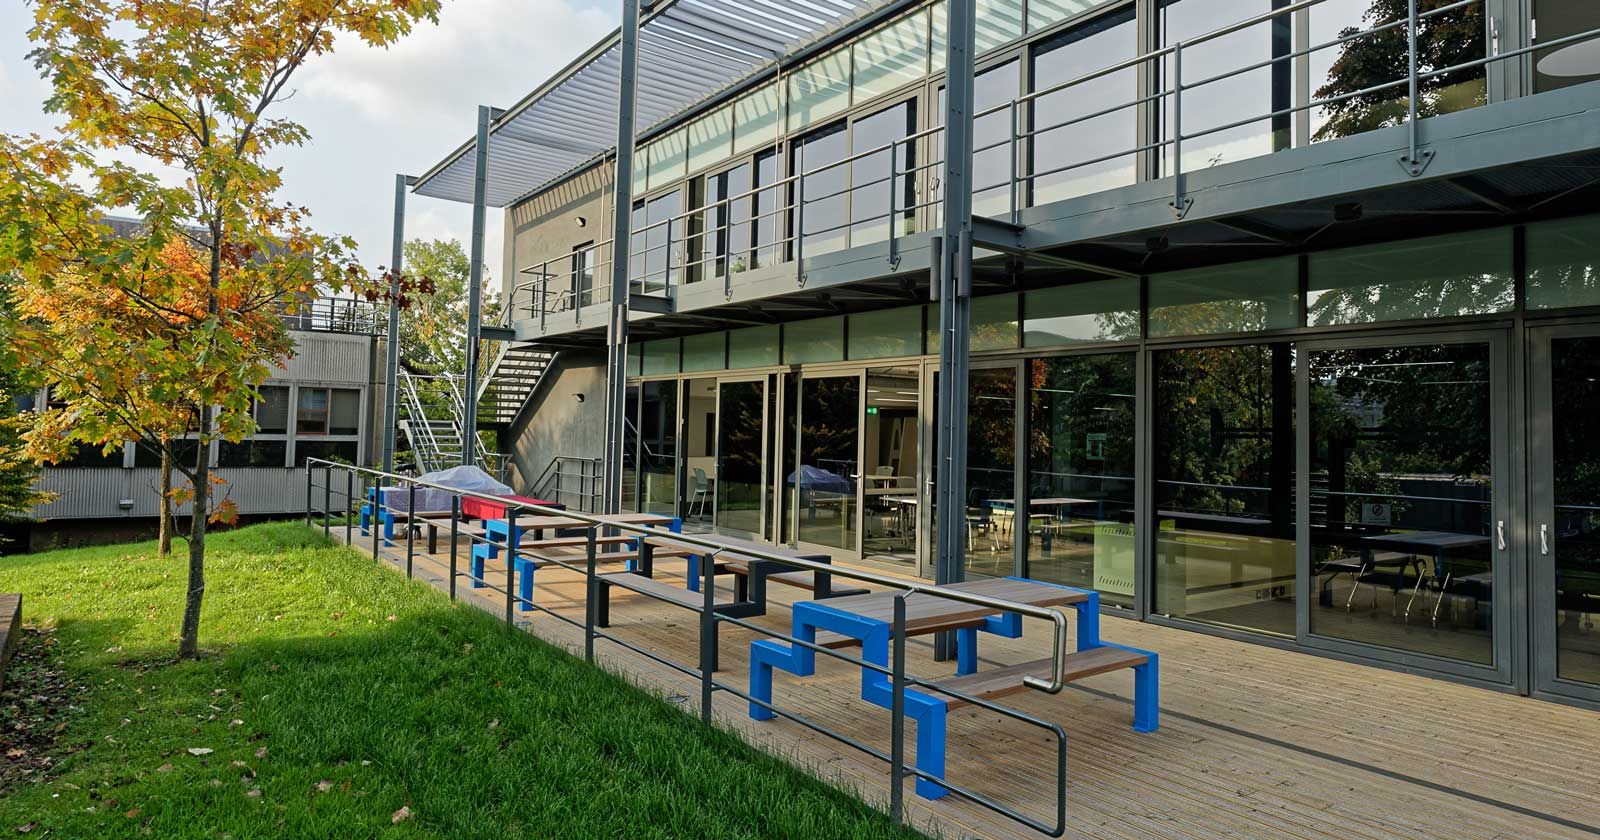 Loughborough-University-School-of-Architecture-Refit-external-curtain-walling-and-seating-by-APSS